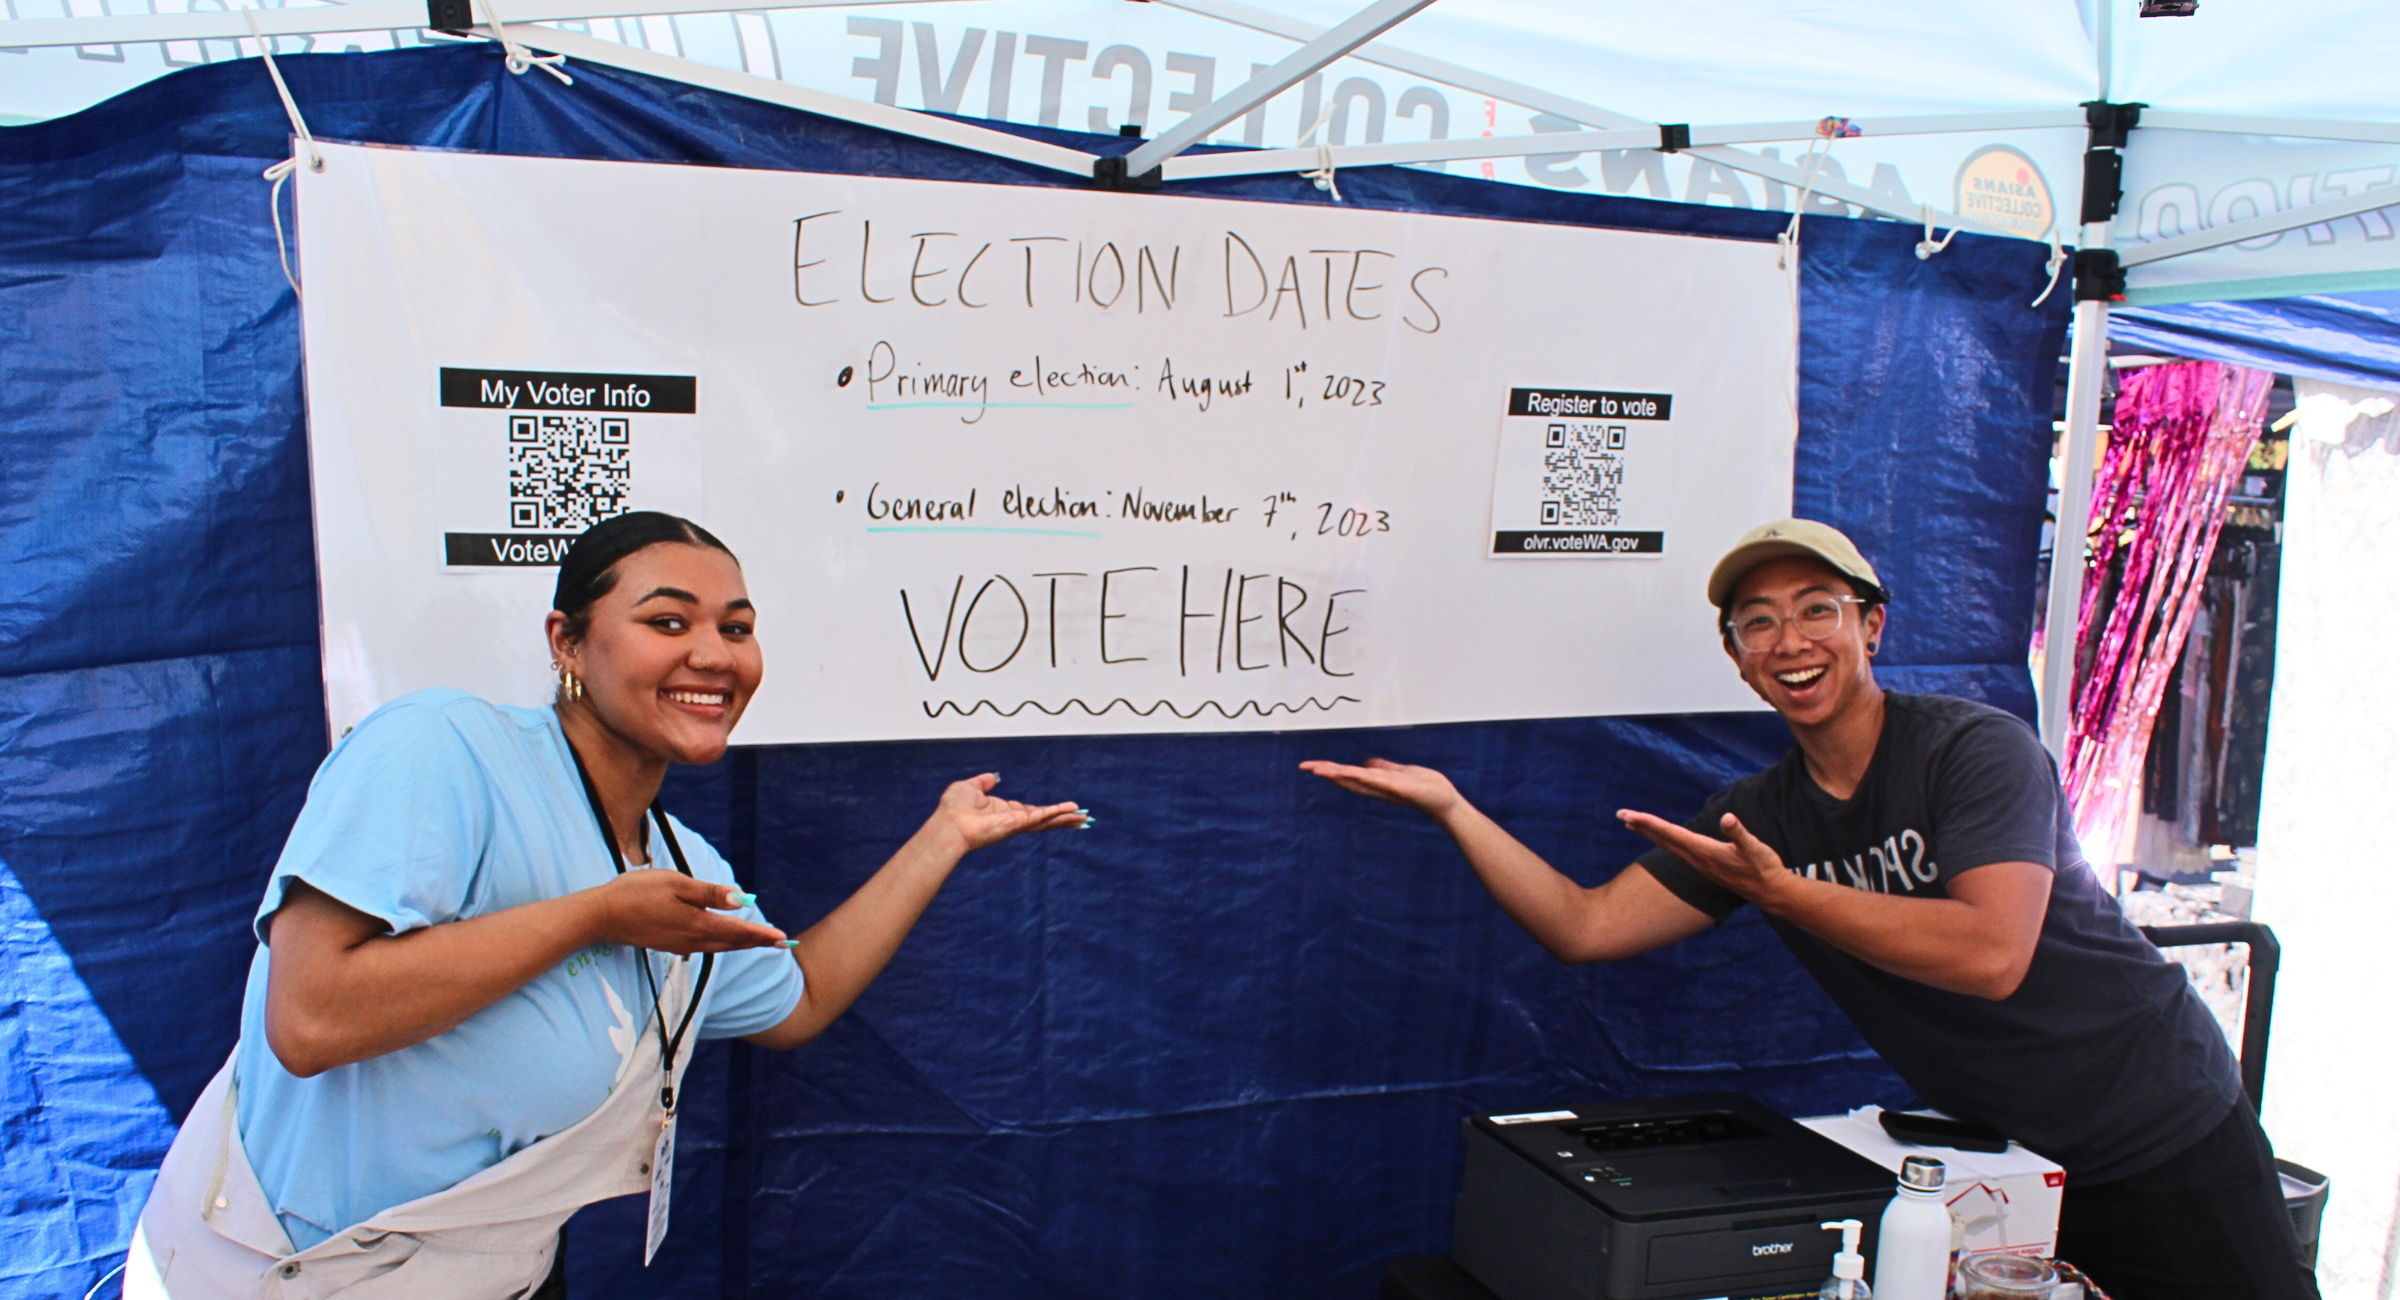 photograph of 2 people standing in front of a "get out the vote" poster and pointing to the "vote here" sign